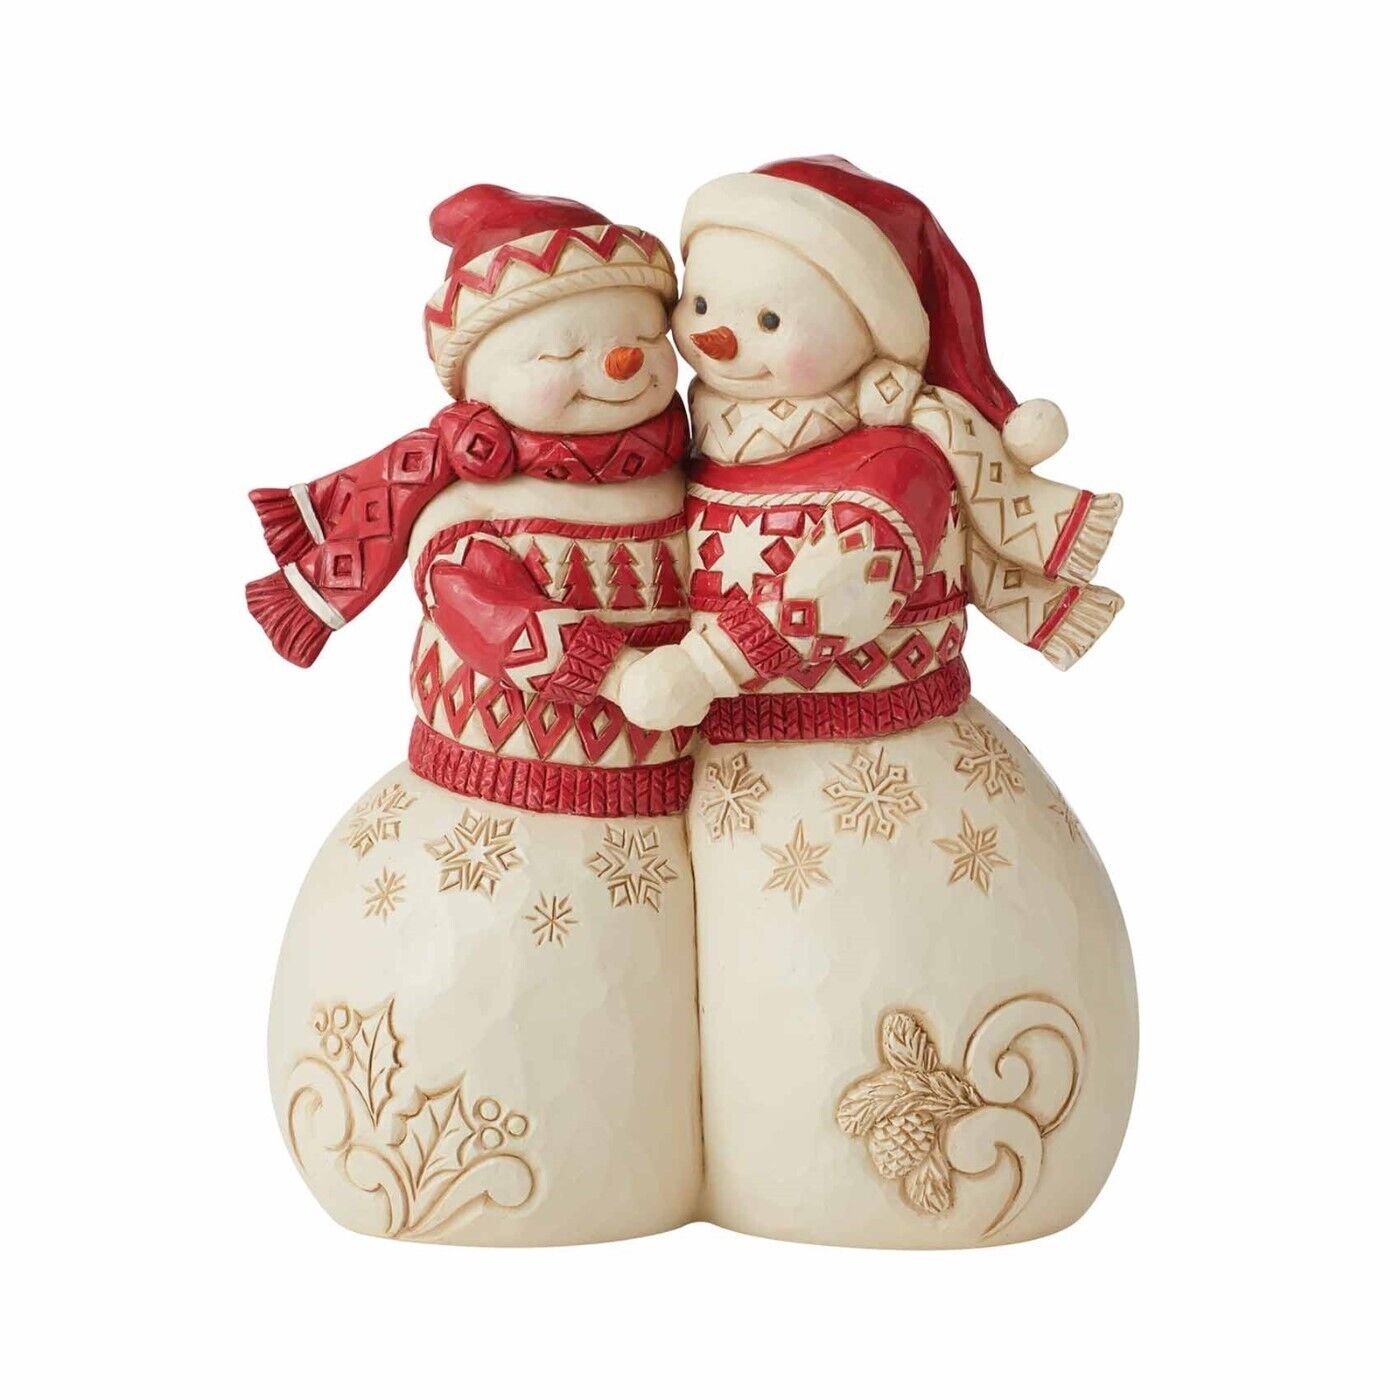 Baby It\'s Cold Outside Snowman Couple Christmas Figurine by Jim Shore 6010834